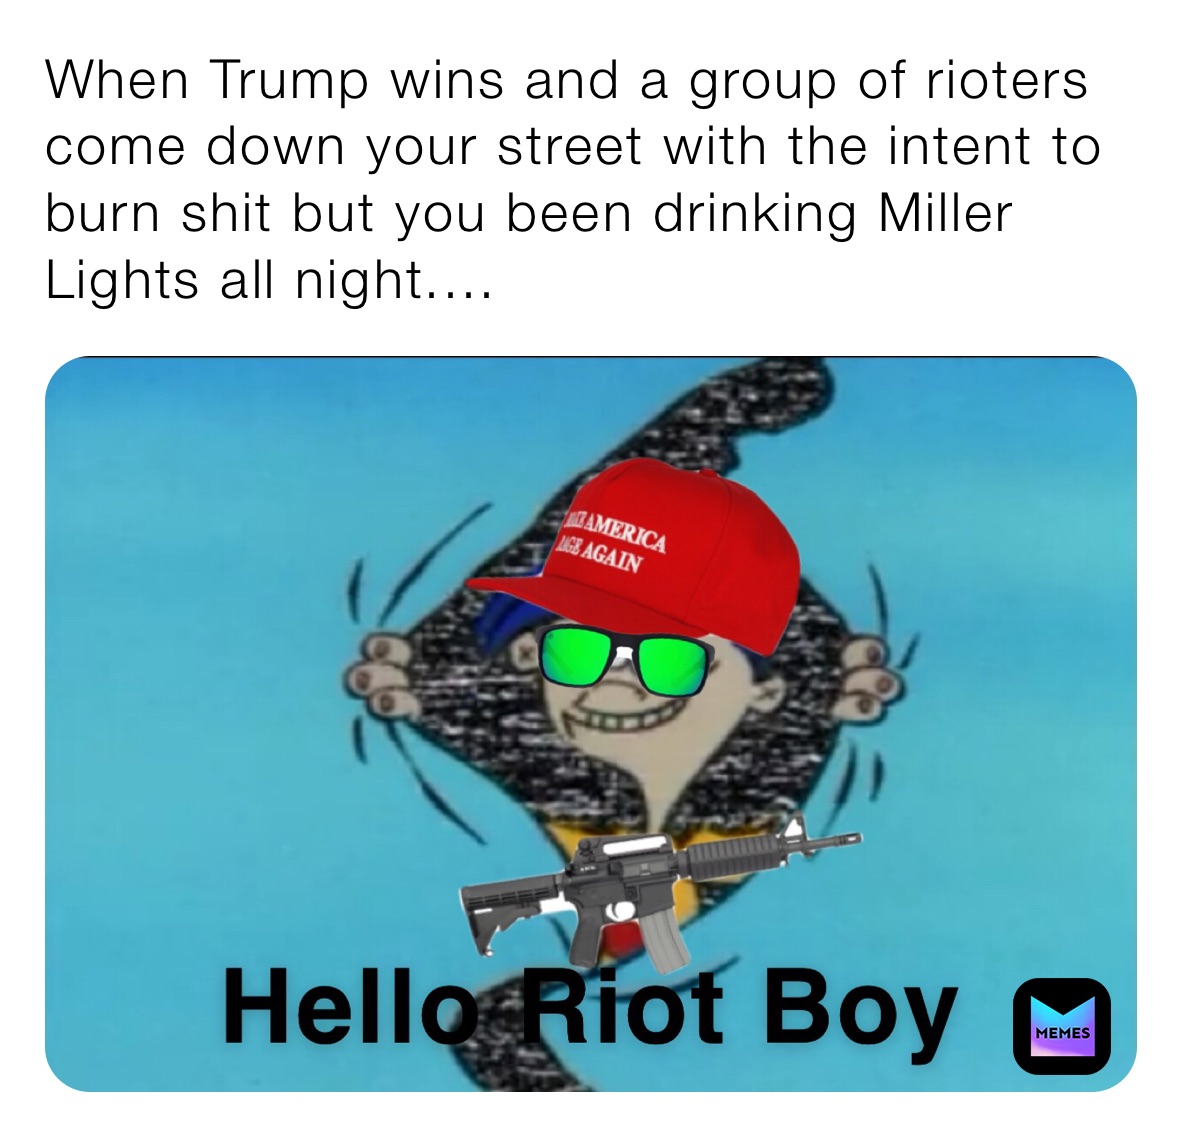 When Trump wins and a group of rioters come down your street with the intent to burn shit but you been drinking Miller Lights all night....